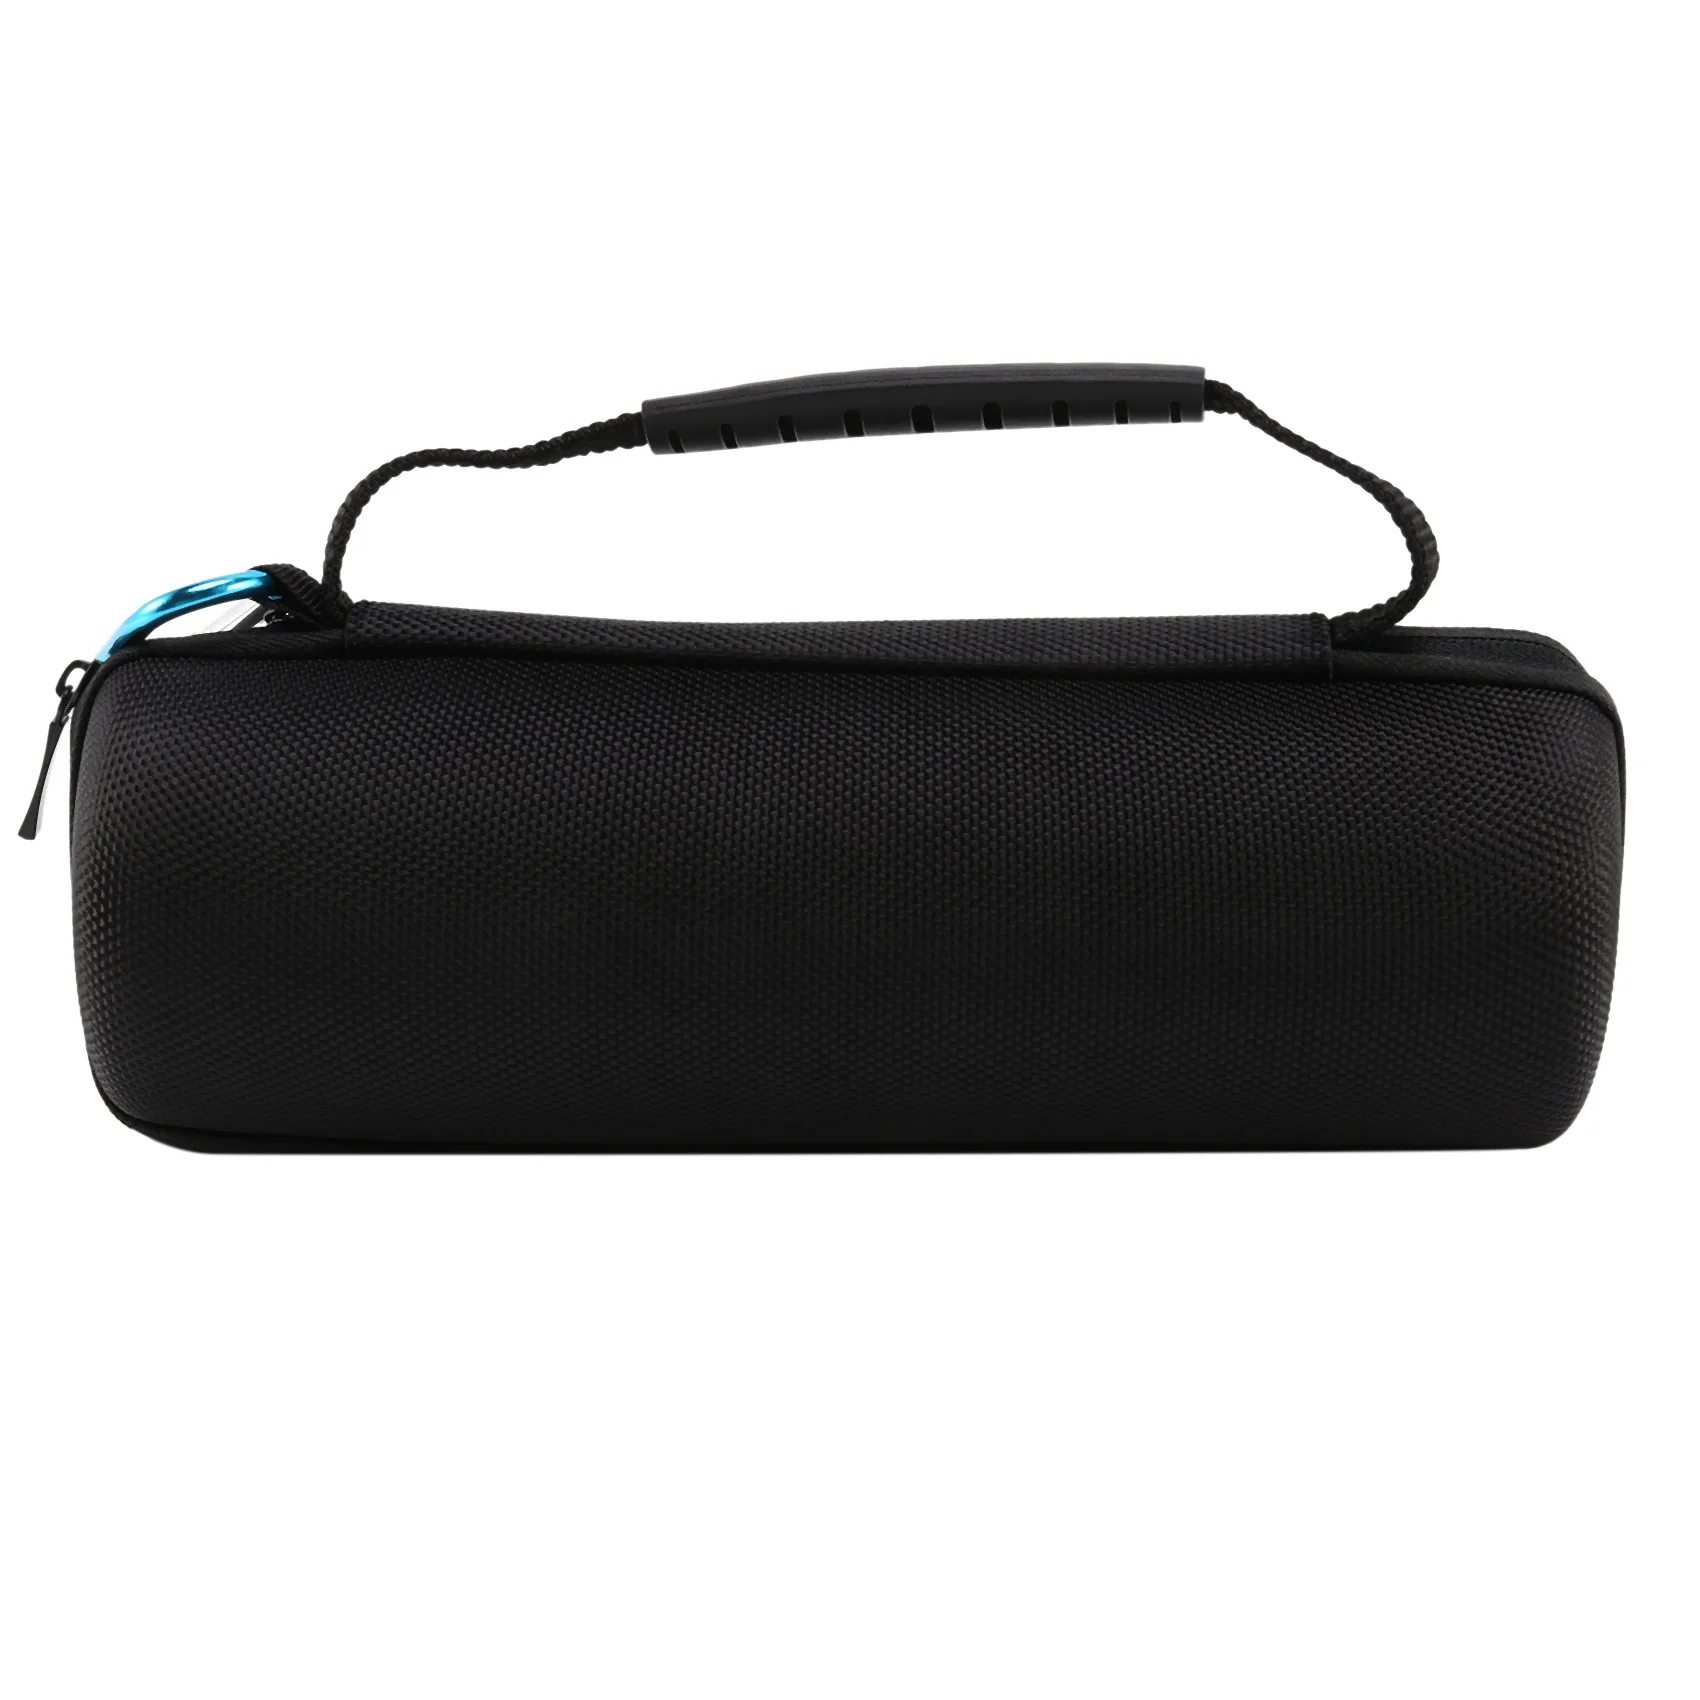 Hard Case Travel Carrying Storage Bag for JBL Flip 4 / 3 Wireless Bluetooth Portable Speaker. Fits USB Cable and Wall | Электроника